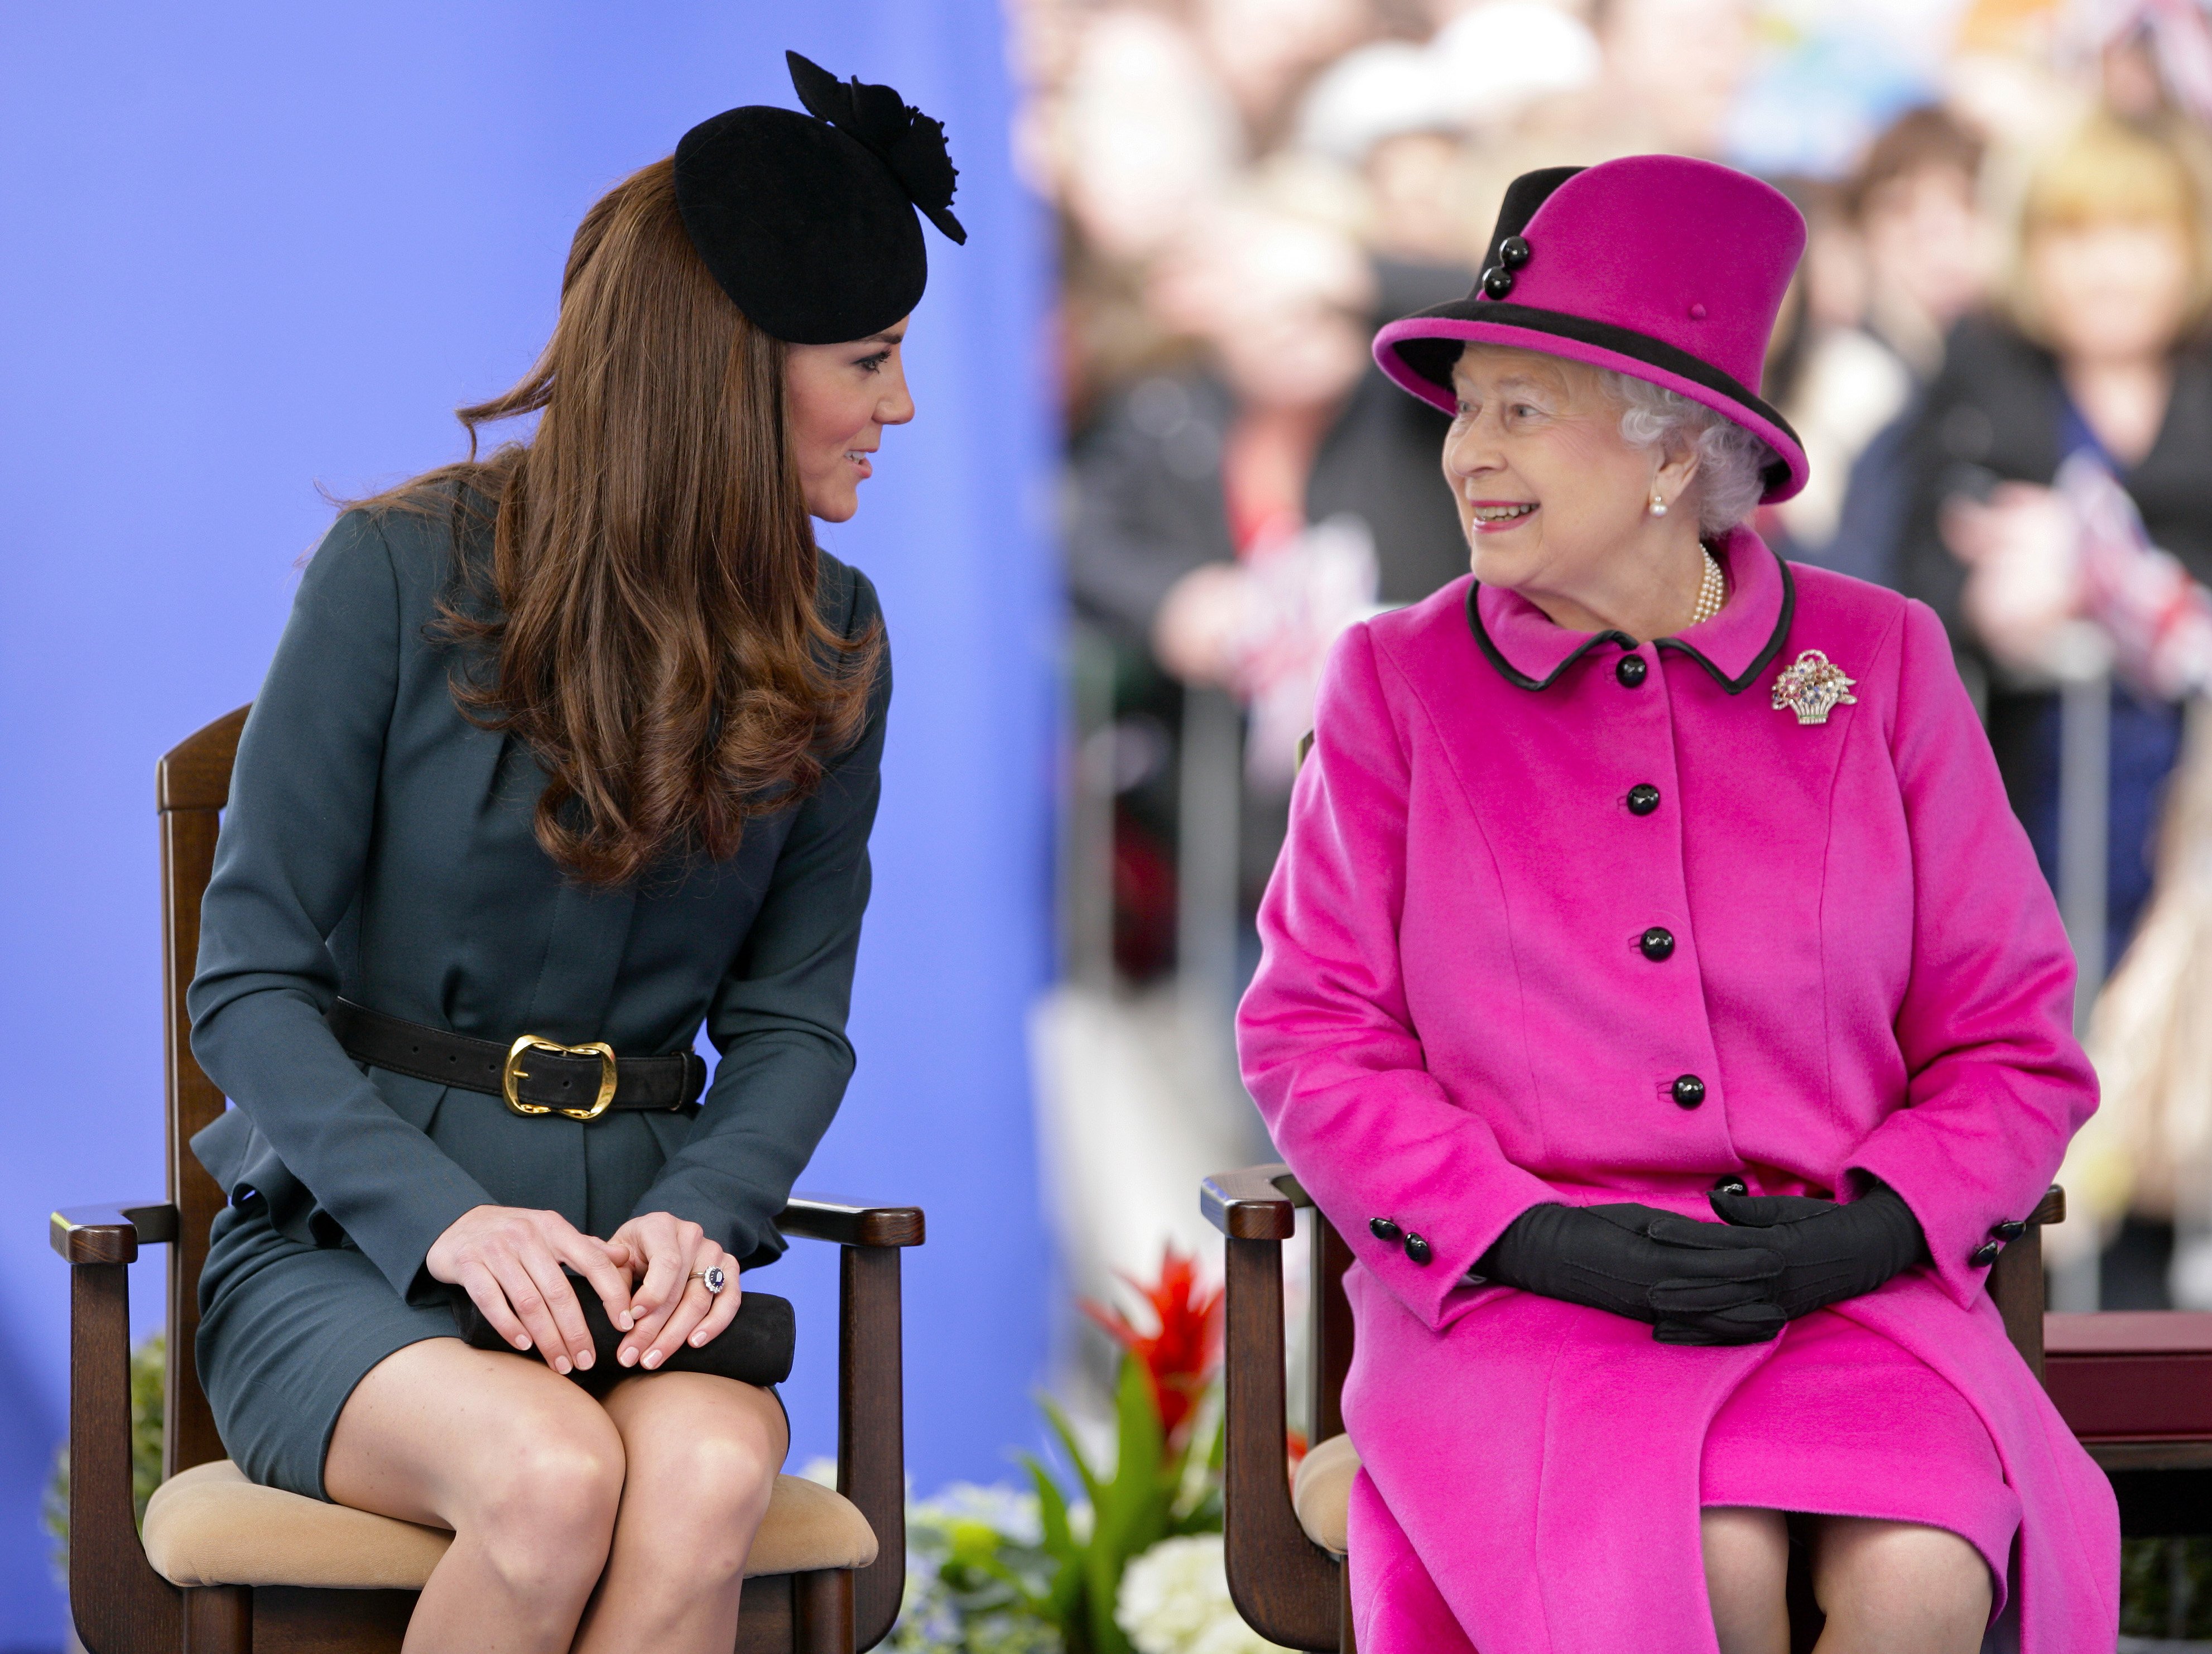 Catherine, Duchess of Cambridge and Queen Elizabeth II and Prince Philip, Duke of Edinburgh visit Leicester on March 8, 2012 in Leicester, England. | Source: Getty Images